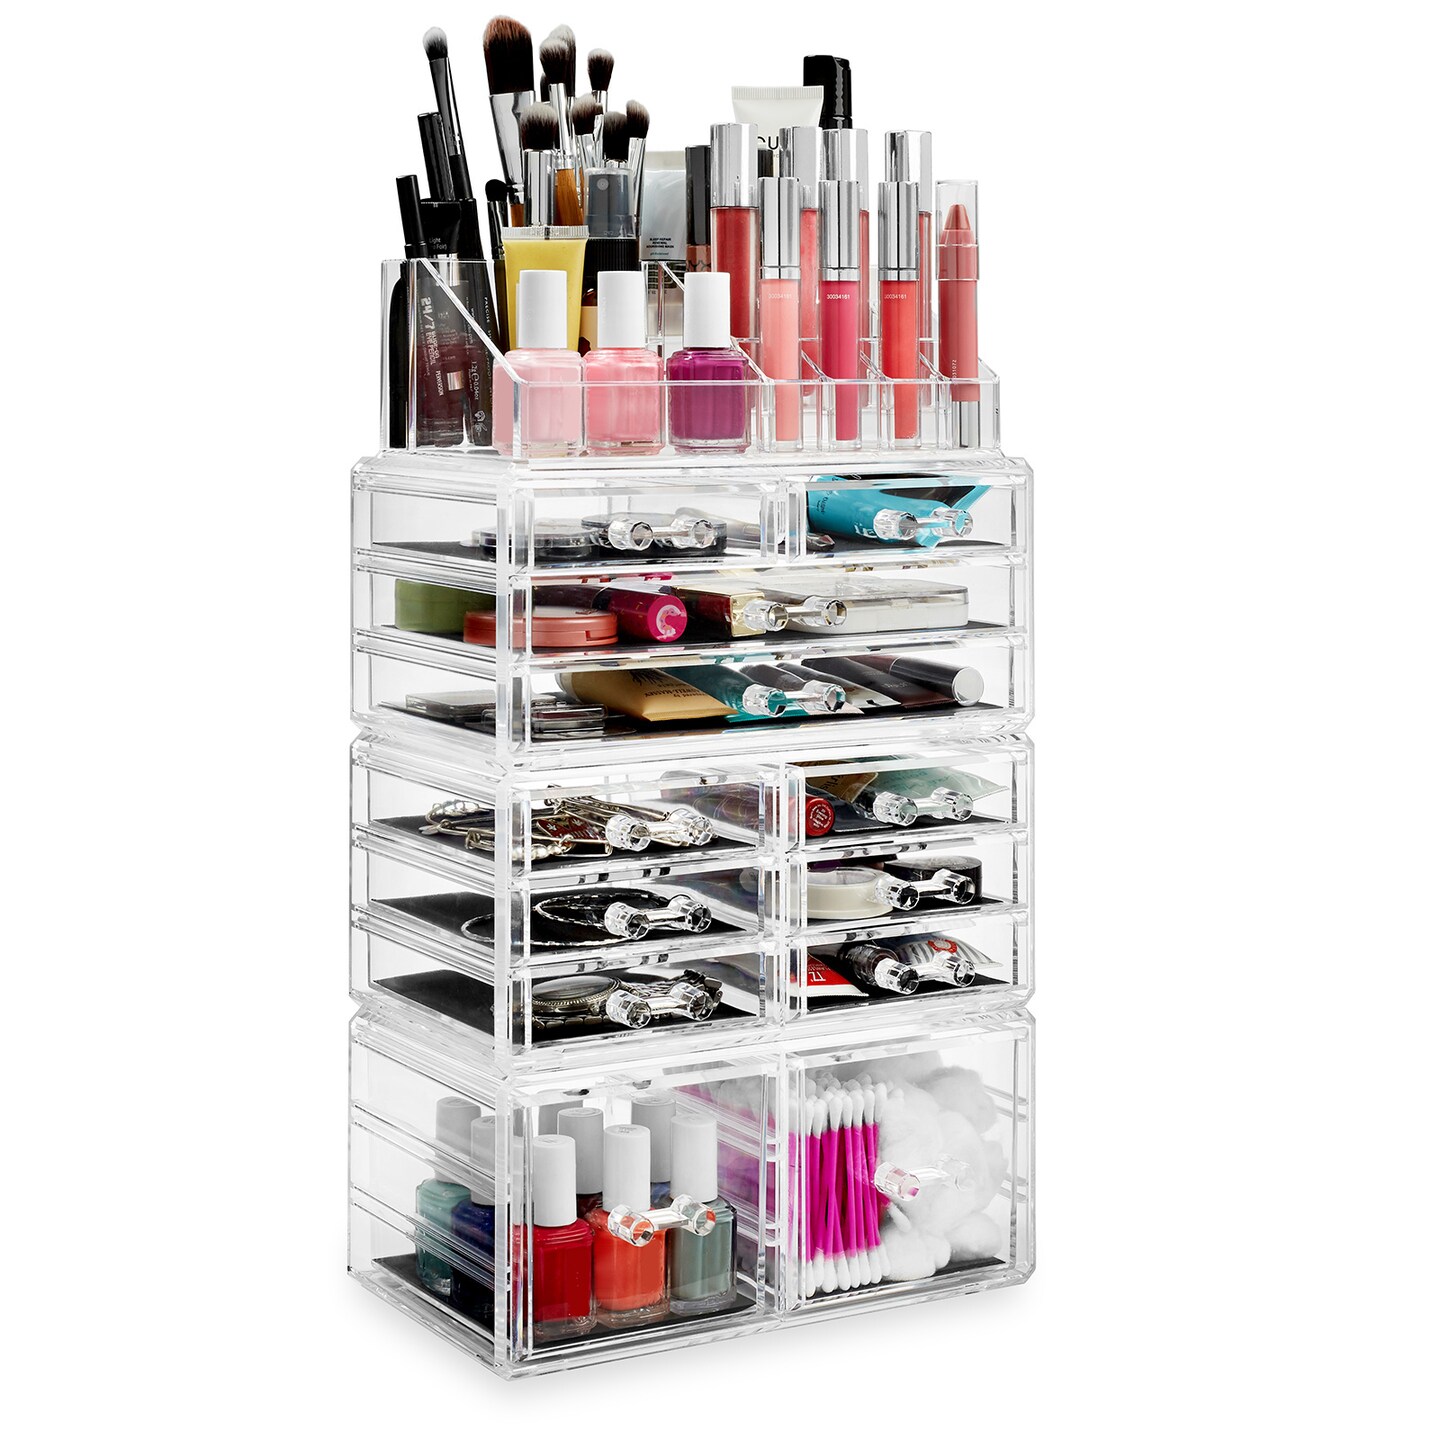 Casafield Acrylic Cosmetic Makeup Organizer & Jewelry Storage Display Case  - 4 Large, 2 Small Drawer Set - Clear